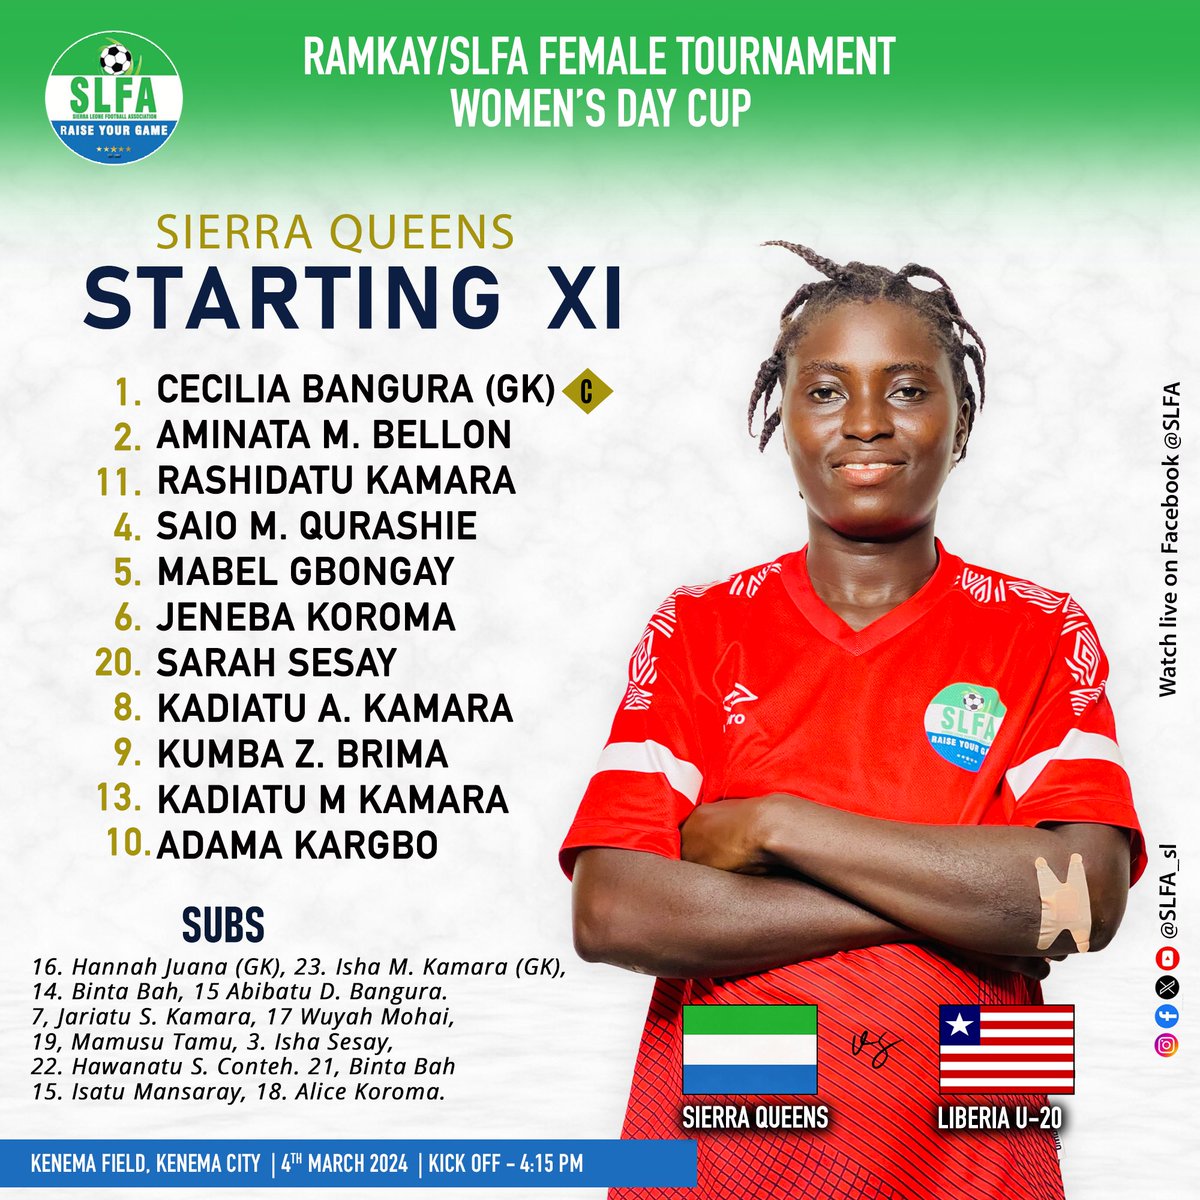 Head Coach Hassan “Zenetti” Mansaray prepares his girls for another exciting match as Sierra Leone is ready to take on Liberia in the Women’s Day Cup, organized by RamKay and the Sierra Leone Football Association. #SierraLeone #WomensDayCup2024 #RamKay #RaiseYourGame